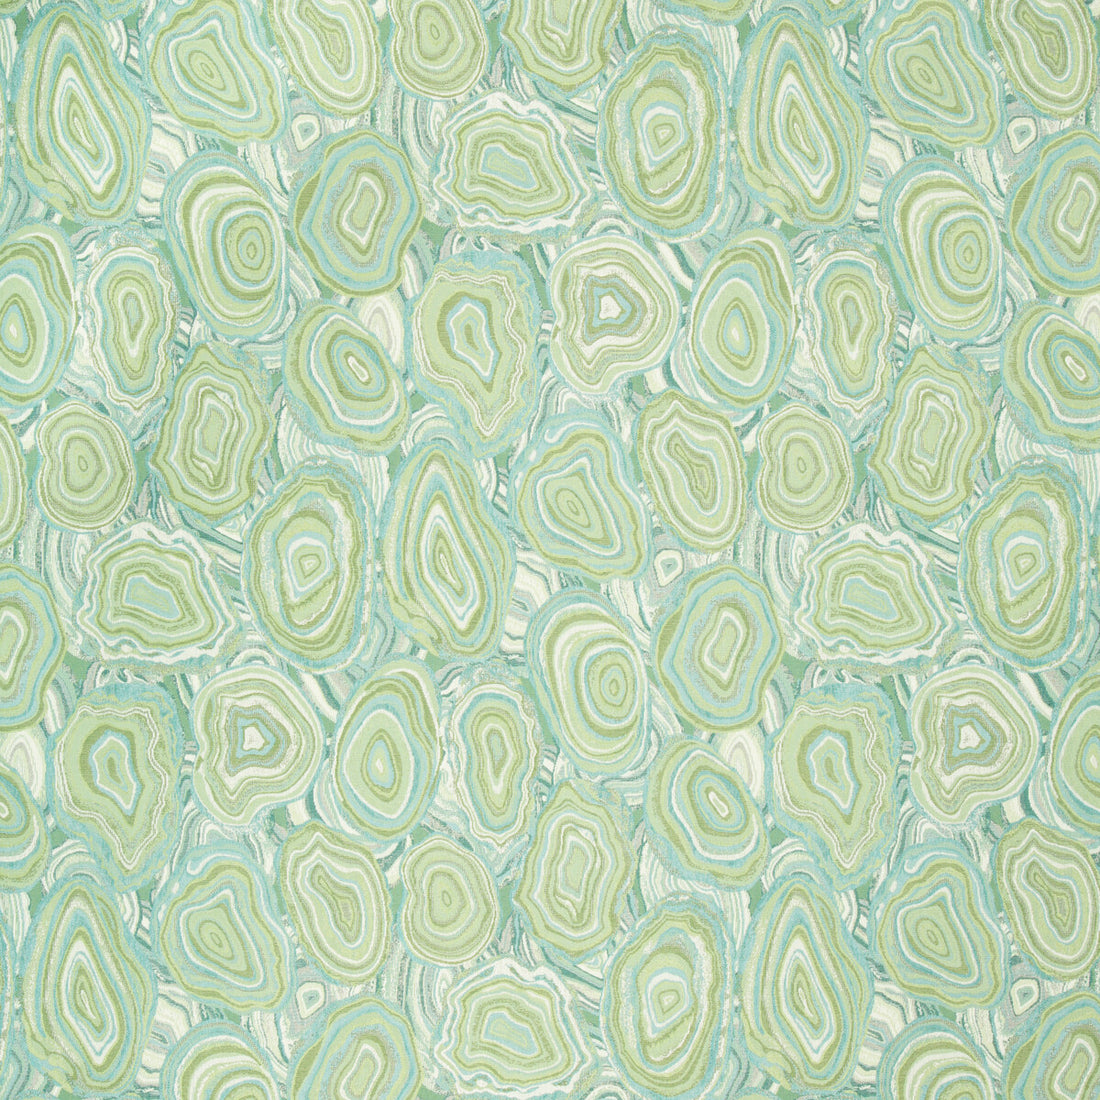 Kravet Design fabric in 34707-3 color - pattern 34707.3.0 - by Kravet Design in the Crypton Home collection